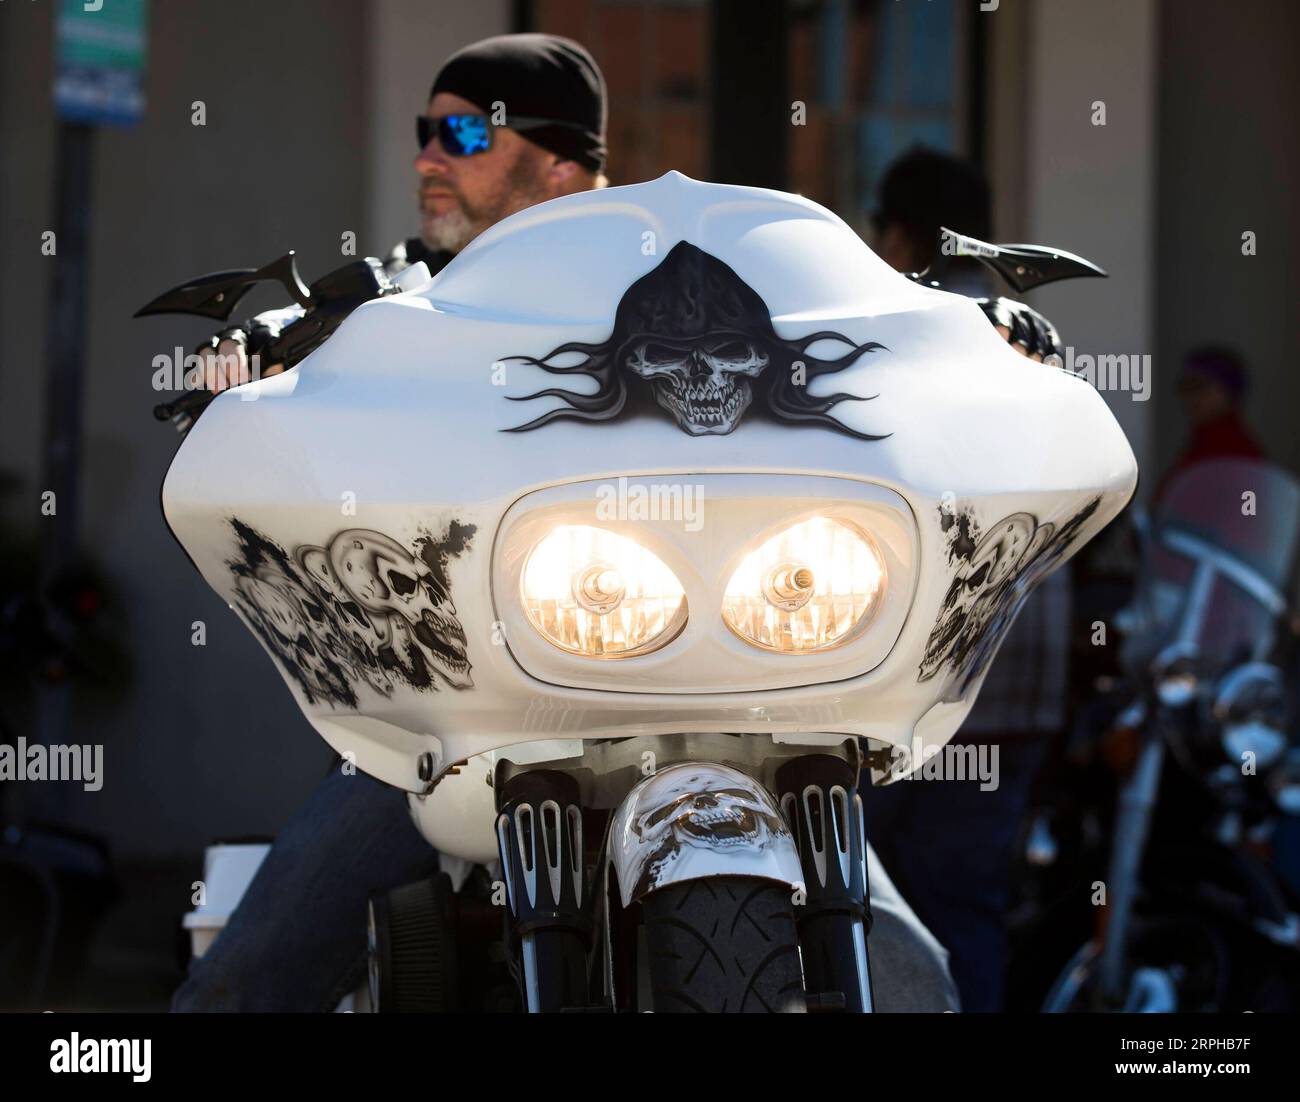 191104 -- HOUSTON, Nov. 4, 2019 -- A motorcyclist parks his skeleton-themed bike at the Lone Star Rally in downtown Galveston, Texas, the United States, on Nov. 3, 2019. The annual Lone Star Rally is one of the most attended events in Galveston. Photo by Yi-Chin Lee/Xinhua U.S.-GALVESTON-LONE STAR RALLY LiuxLiwei PUBLICATIONxNOTxINxCHN Stock Photo